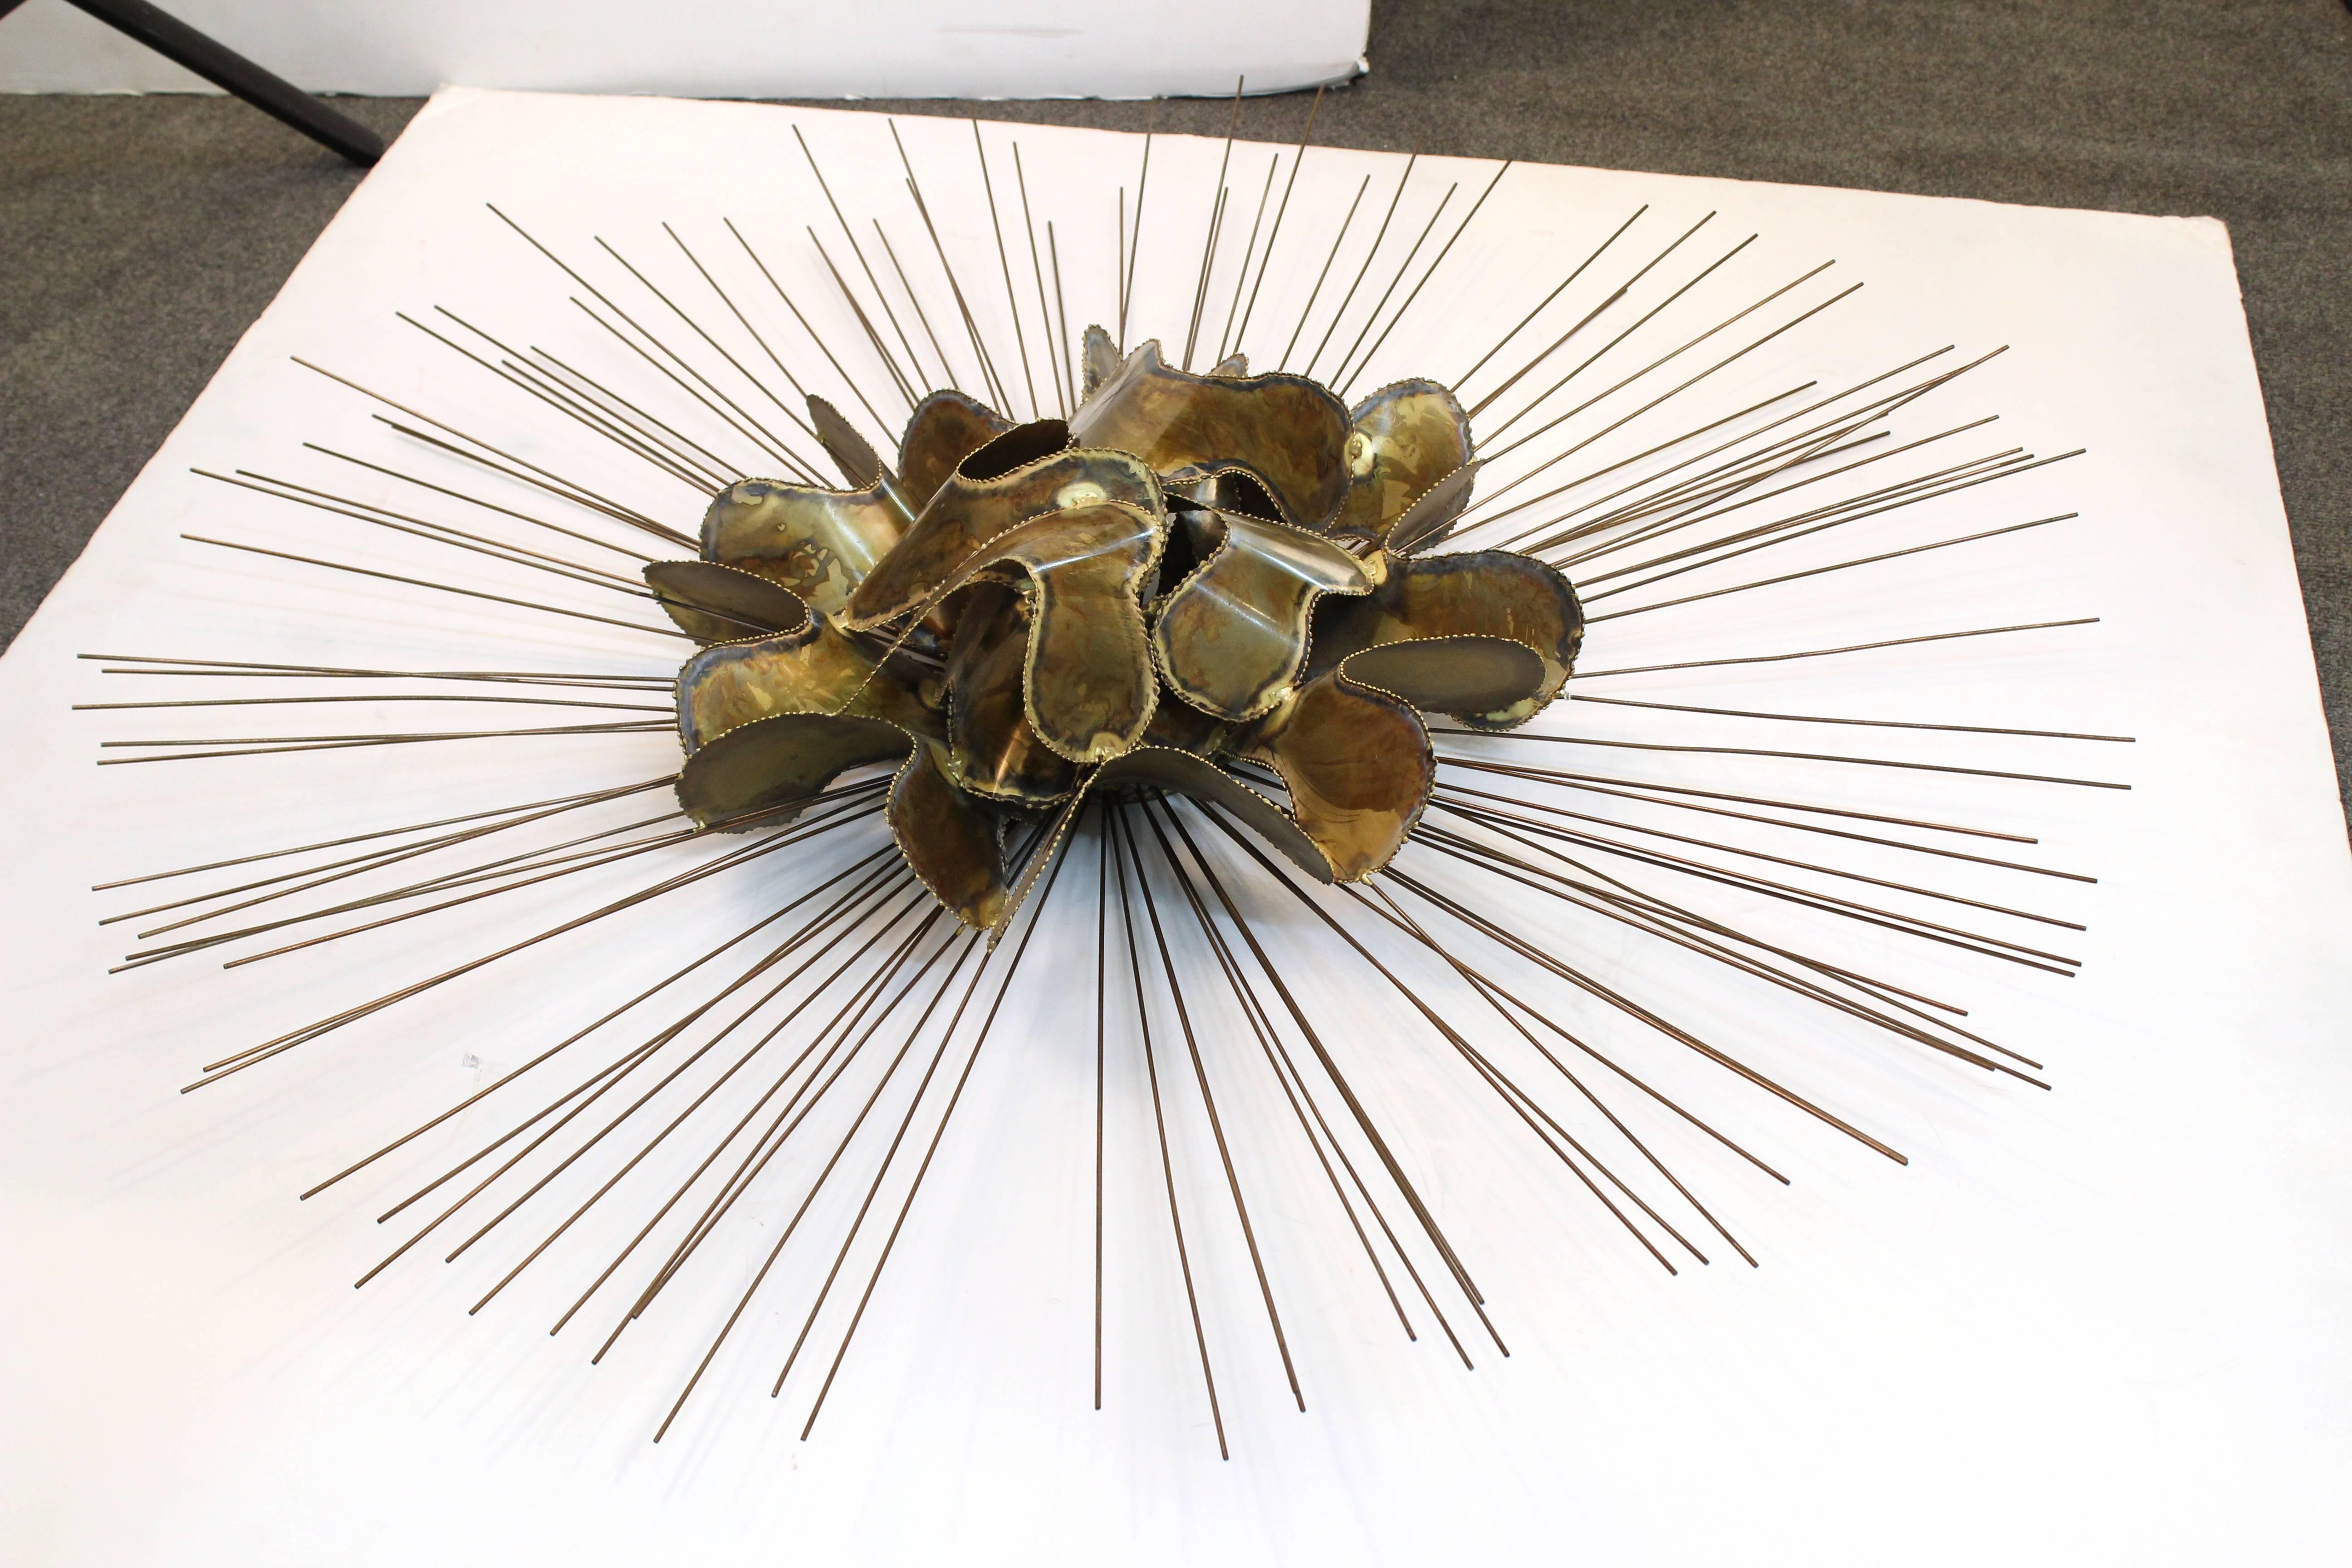 A Mid-Century Modern brass wall sculpture in the style of Silas Seandel, in the shape of a large sunburst. The piece was made in the United States in the 1970s. In great vintage condition with wear appropriate to age and use.